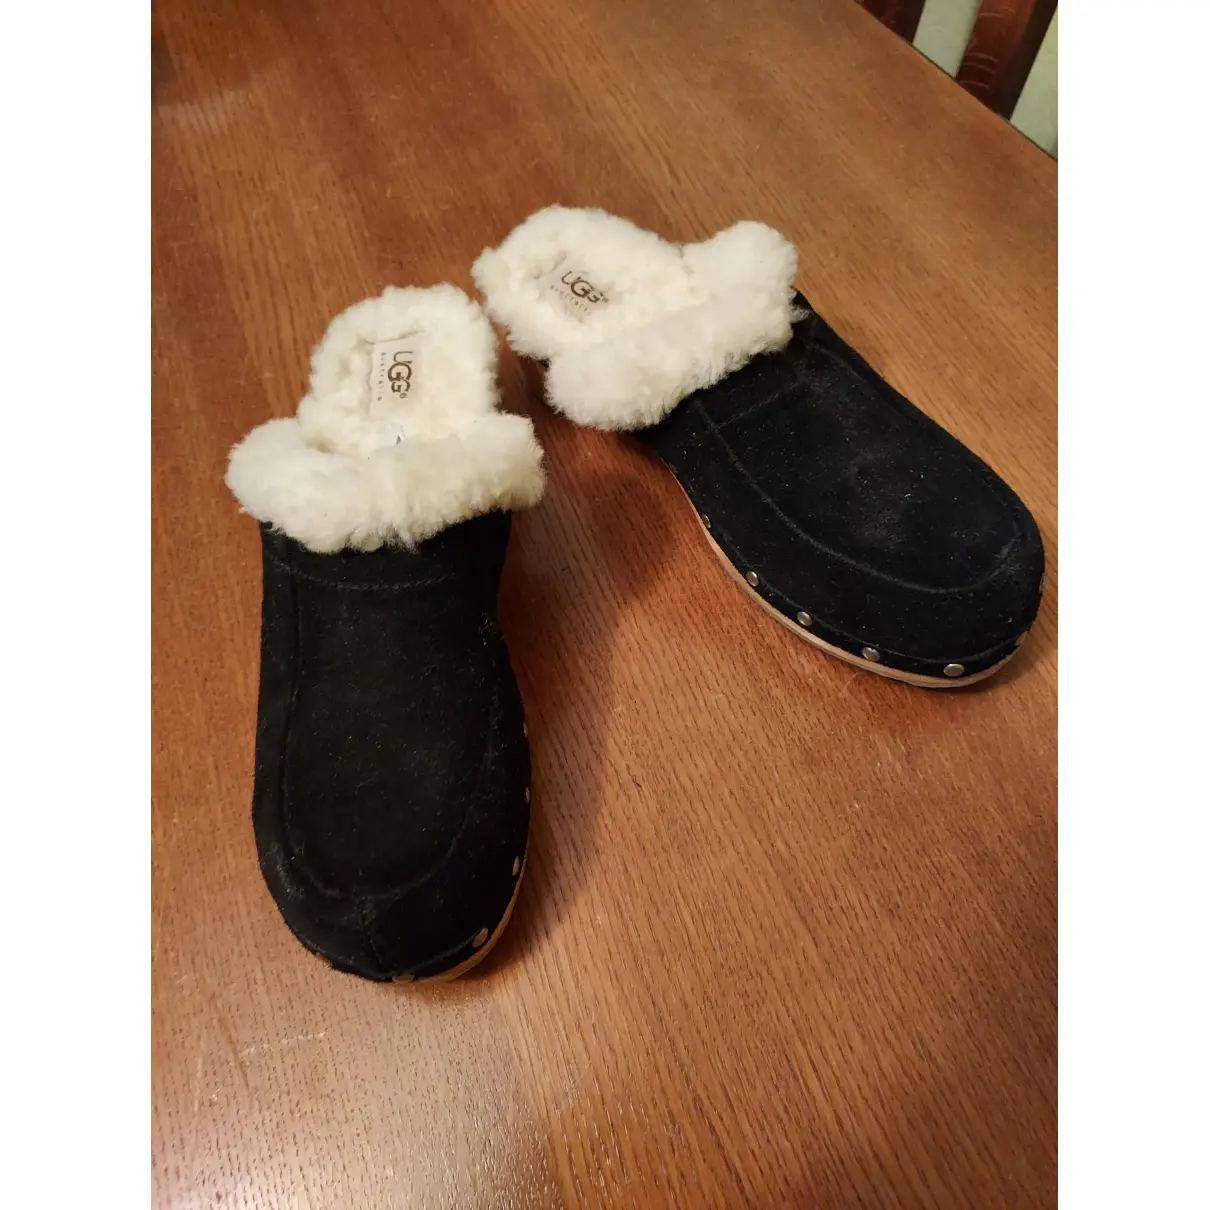 Buy Ugg Pony-style calfskin mules & clogs online